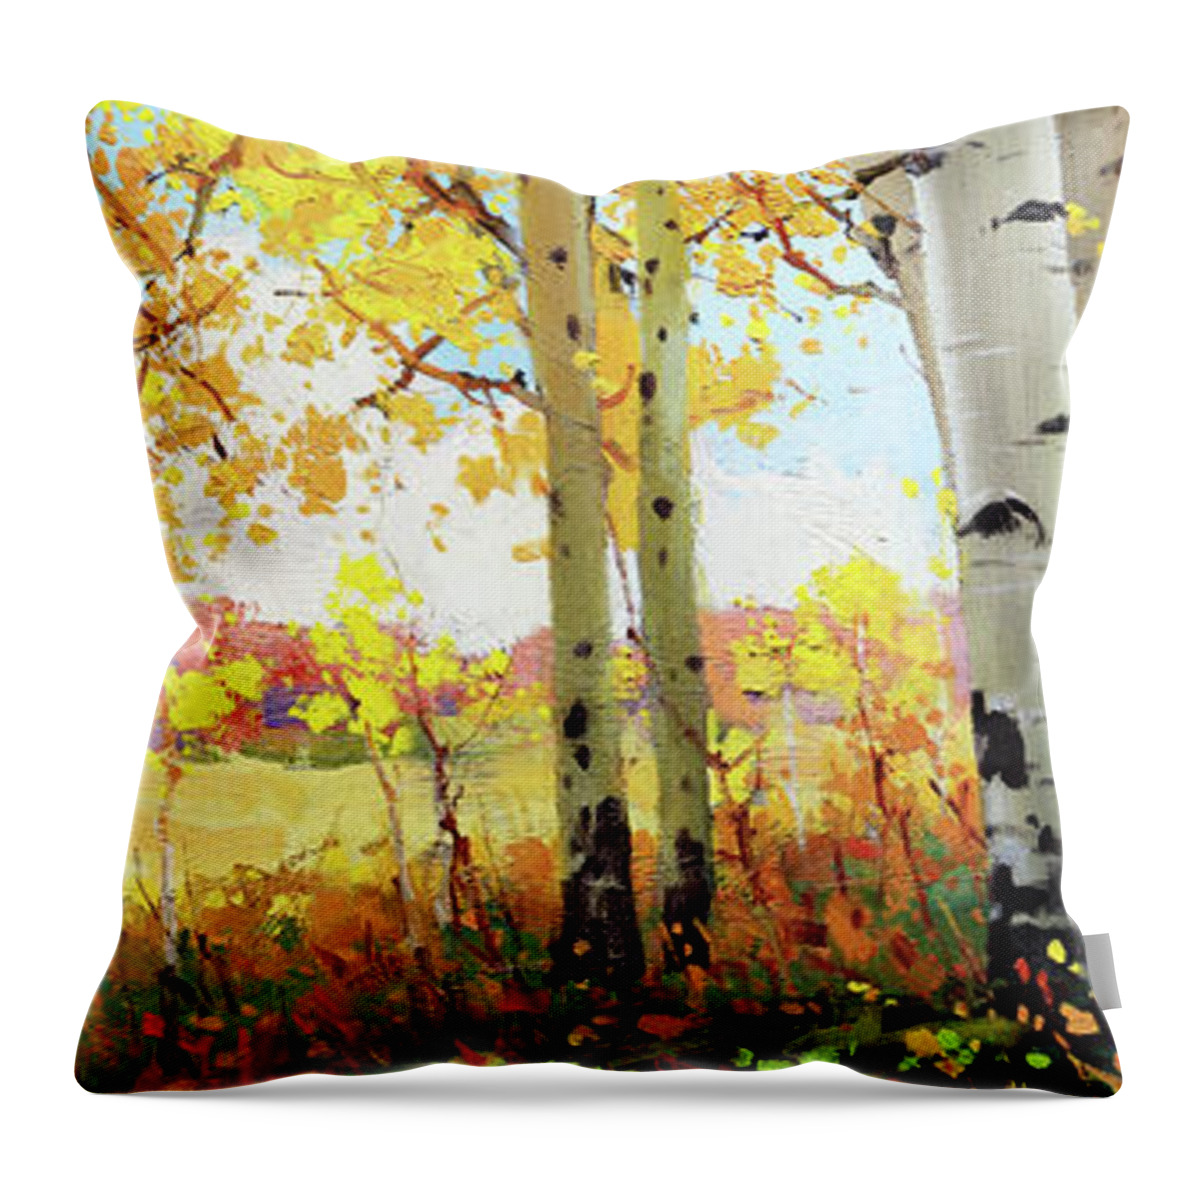 Gay Kim Aspen Tree Landscape Nature Birch Trees Canopy Colorful Sky Original Oil Painting Canvas Contemporary Forest Owl Creek Artist Southwestern Santa Fe National Park Aspen Rocky Moutain Golden Oil Print Art Nature Scenes Healing Trail Santafe Fall Trees Autumn Season Beautiful Beauty Yellow Red-orange Fall Leaves Foliage Autumn Leaf Color Mountain Oil Painting Original Art Horizontal Landscape National Park Morning Nature Wallpaper Outdoor Panoramic Peaceful Scenic Sky Travel Season Bright Throw Pillow featuring the painting Owl Creek Fall Aspen by Gary Kim